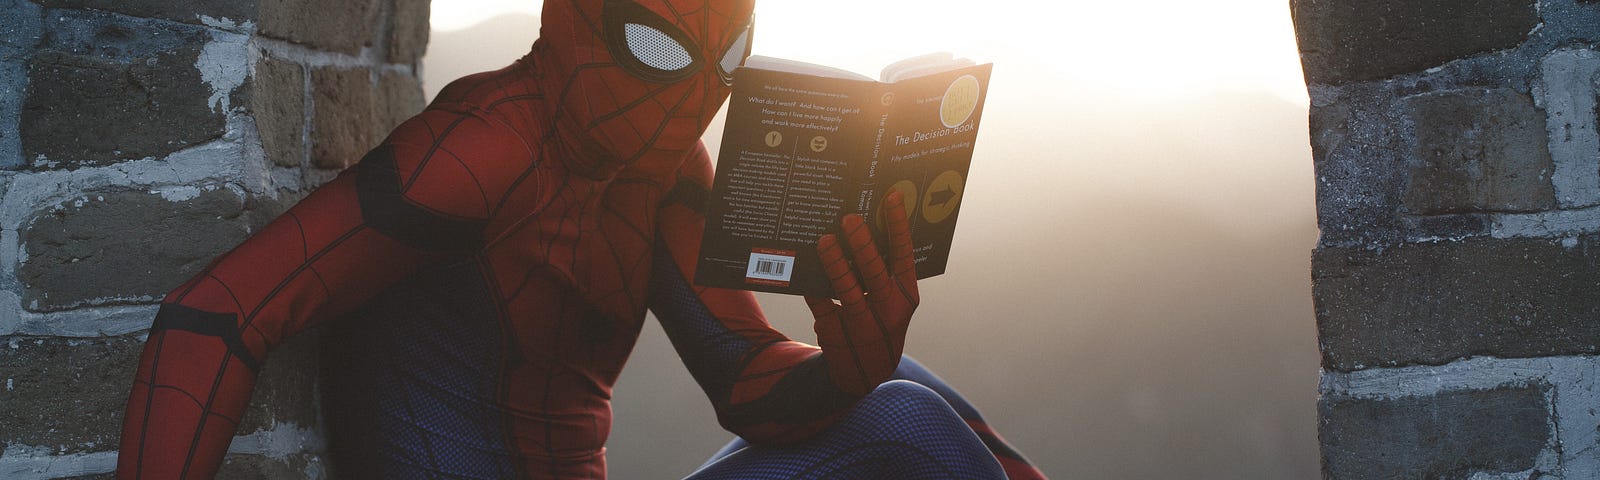 Spiderman reading a book.